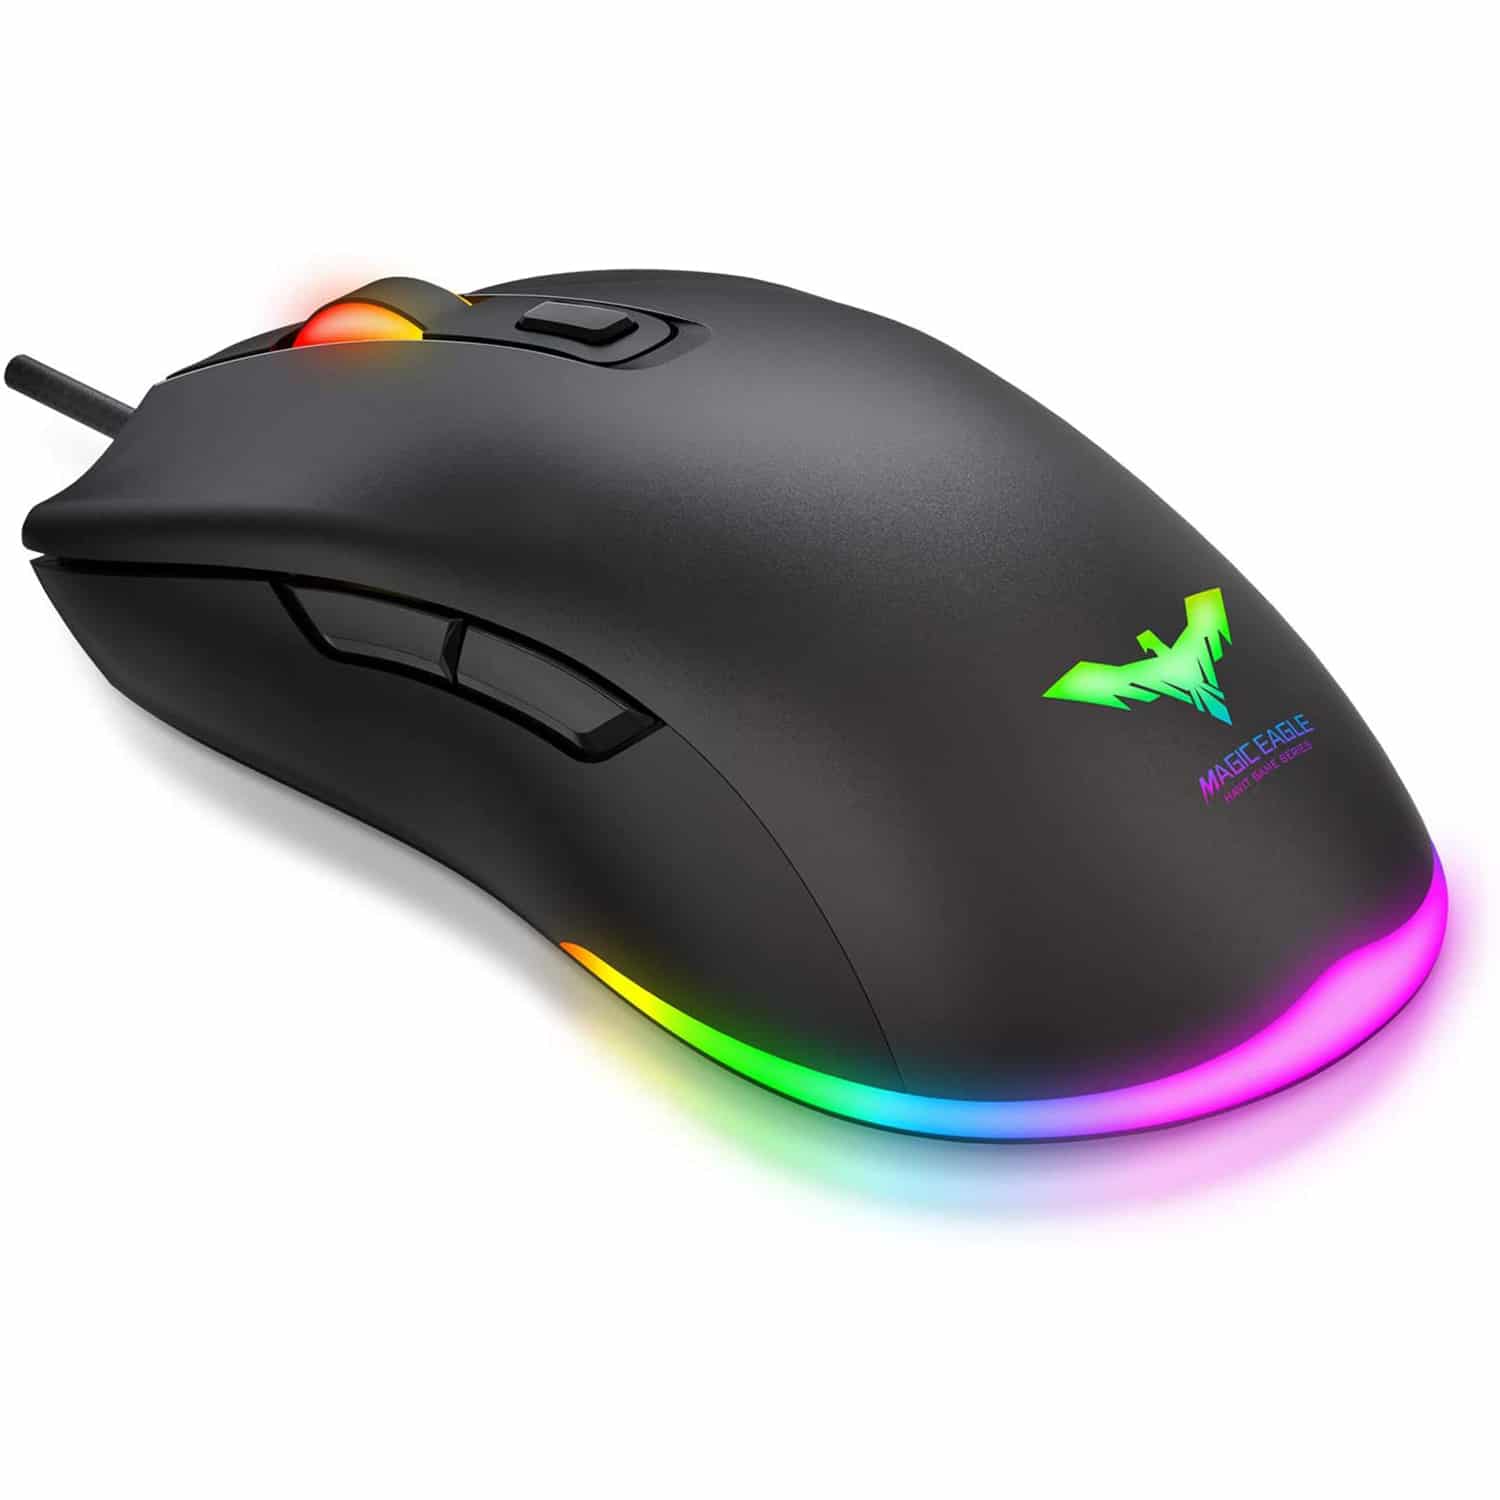 HAVIT MS732 RGB Gaming Mouse with 6400 DPI, Programmable, 7 Color Backlights, 6 Buttons (2020 Version)